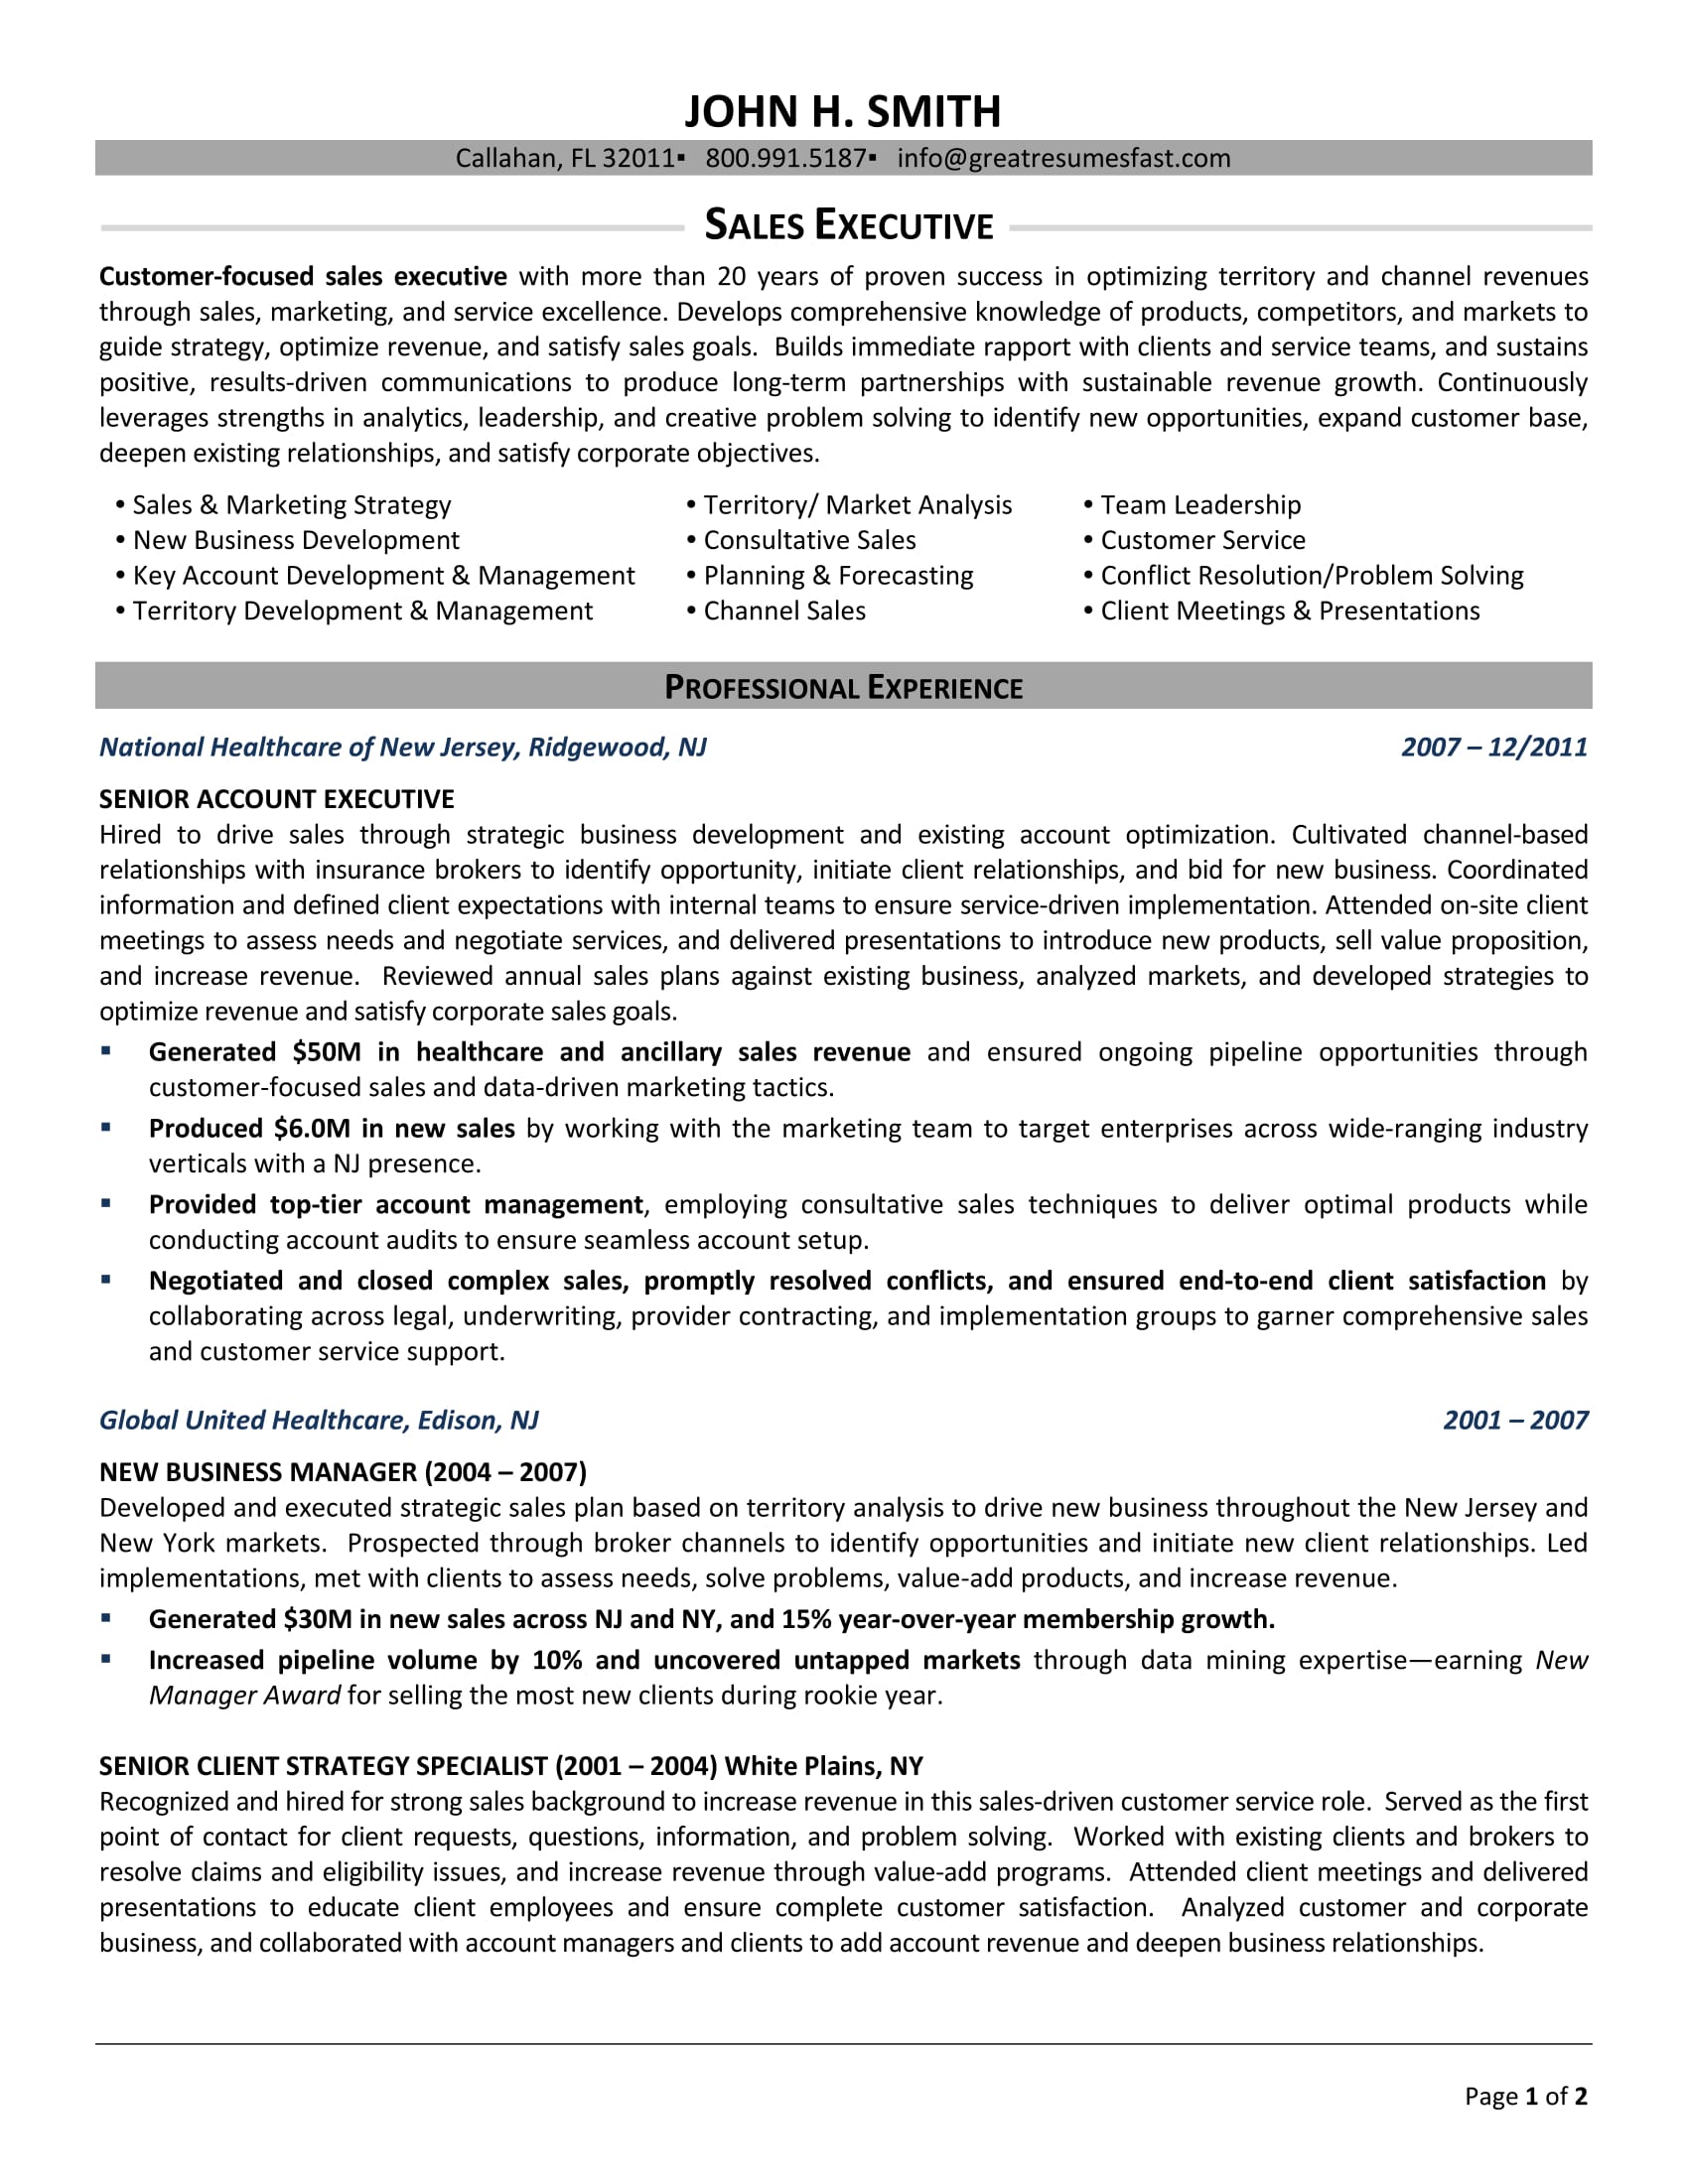 executive summary examples for resume